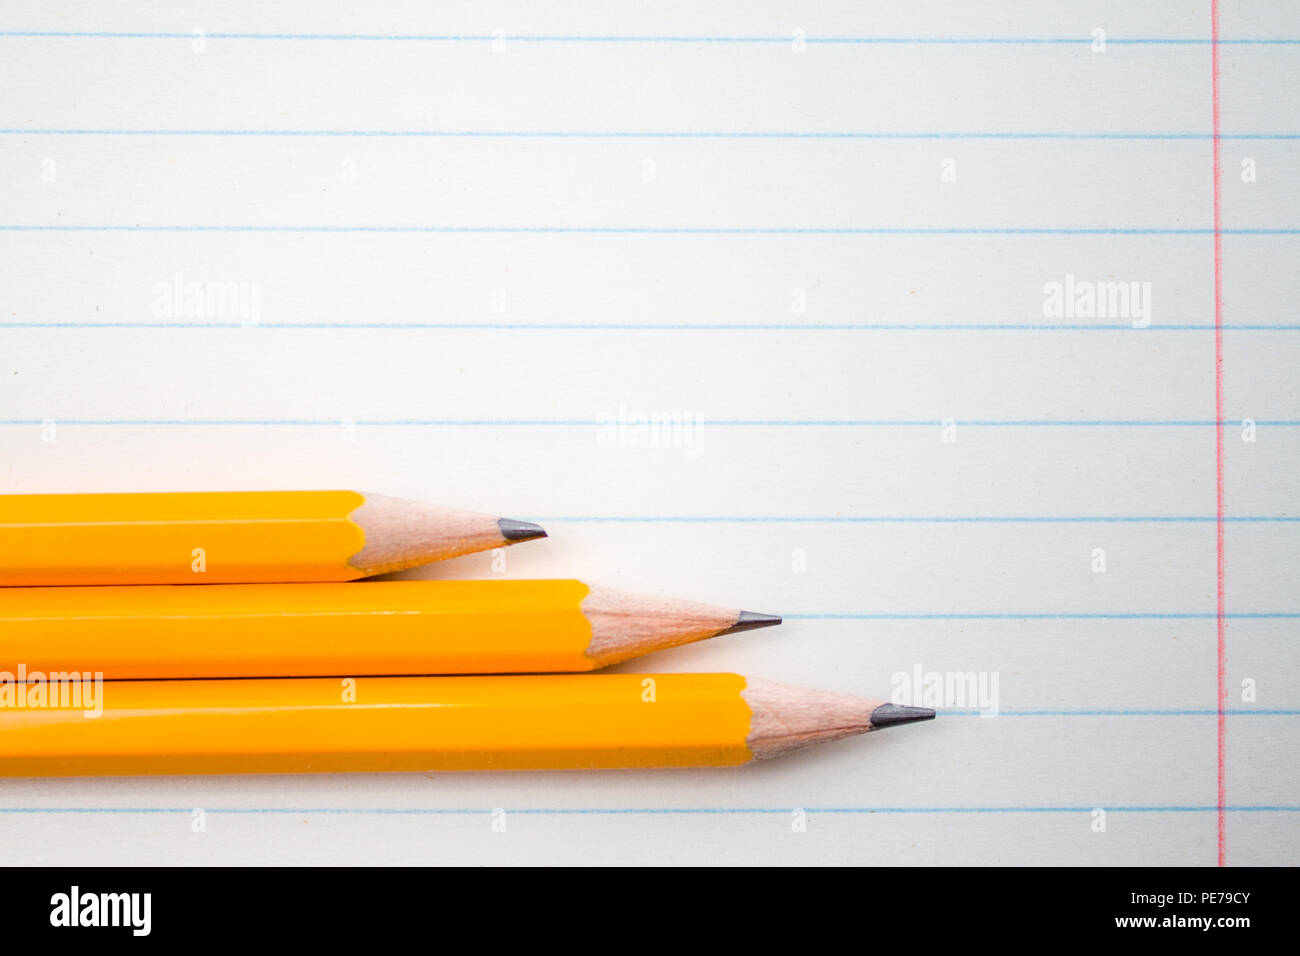 Back to school, education concept - orange pencils close up and composition book on background for educational new academic year begin or study term Stock Photo